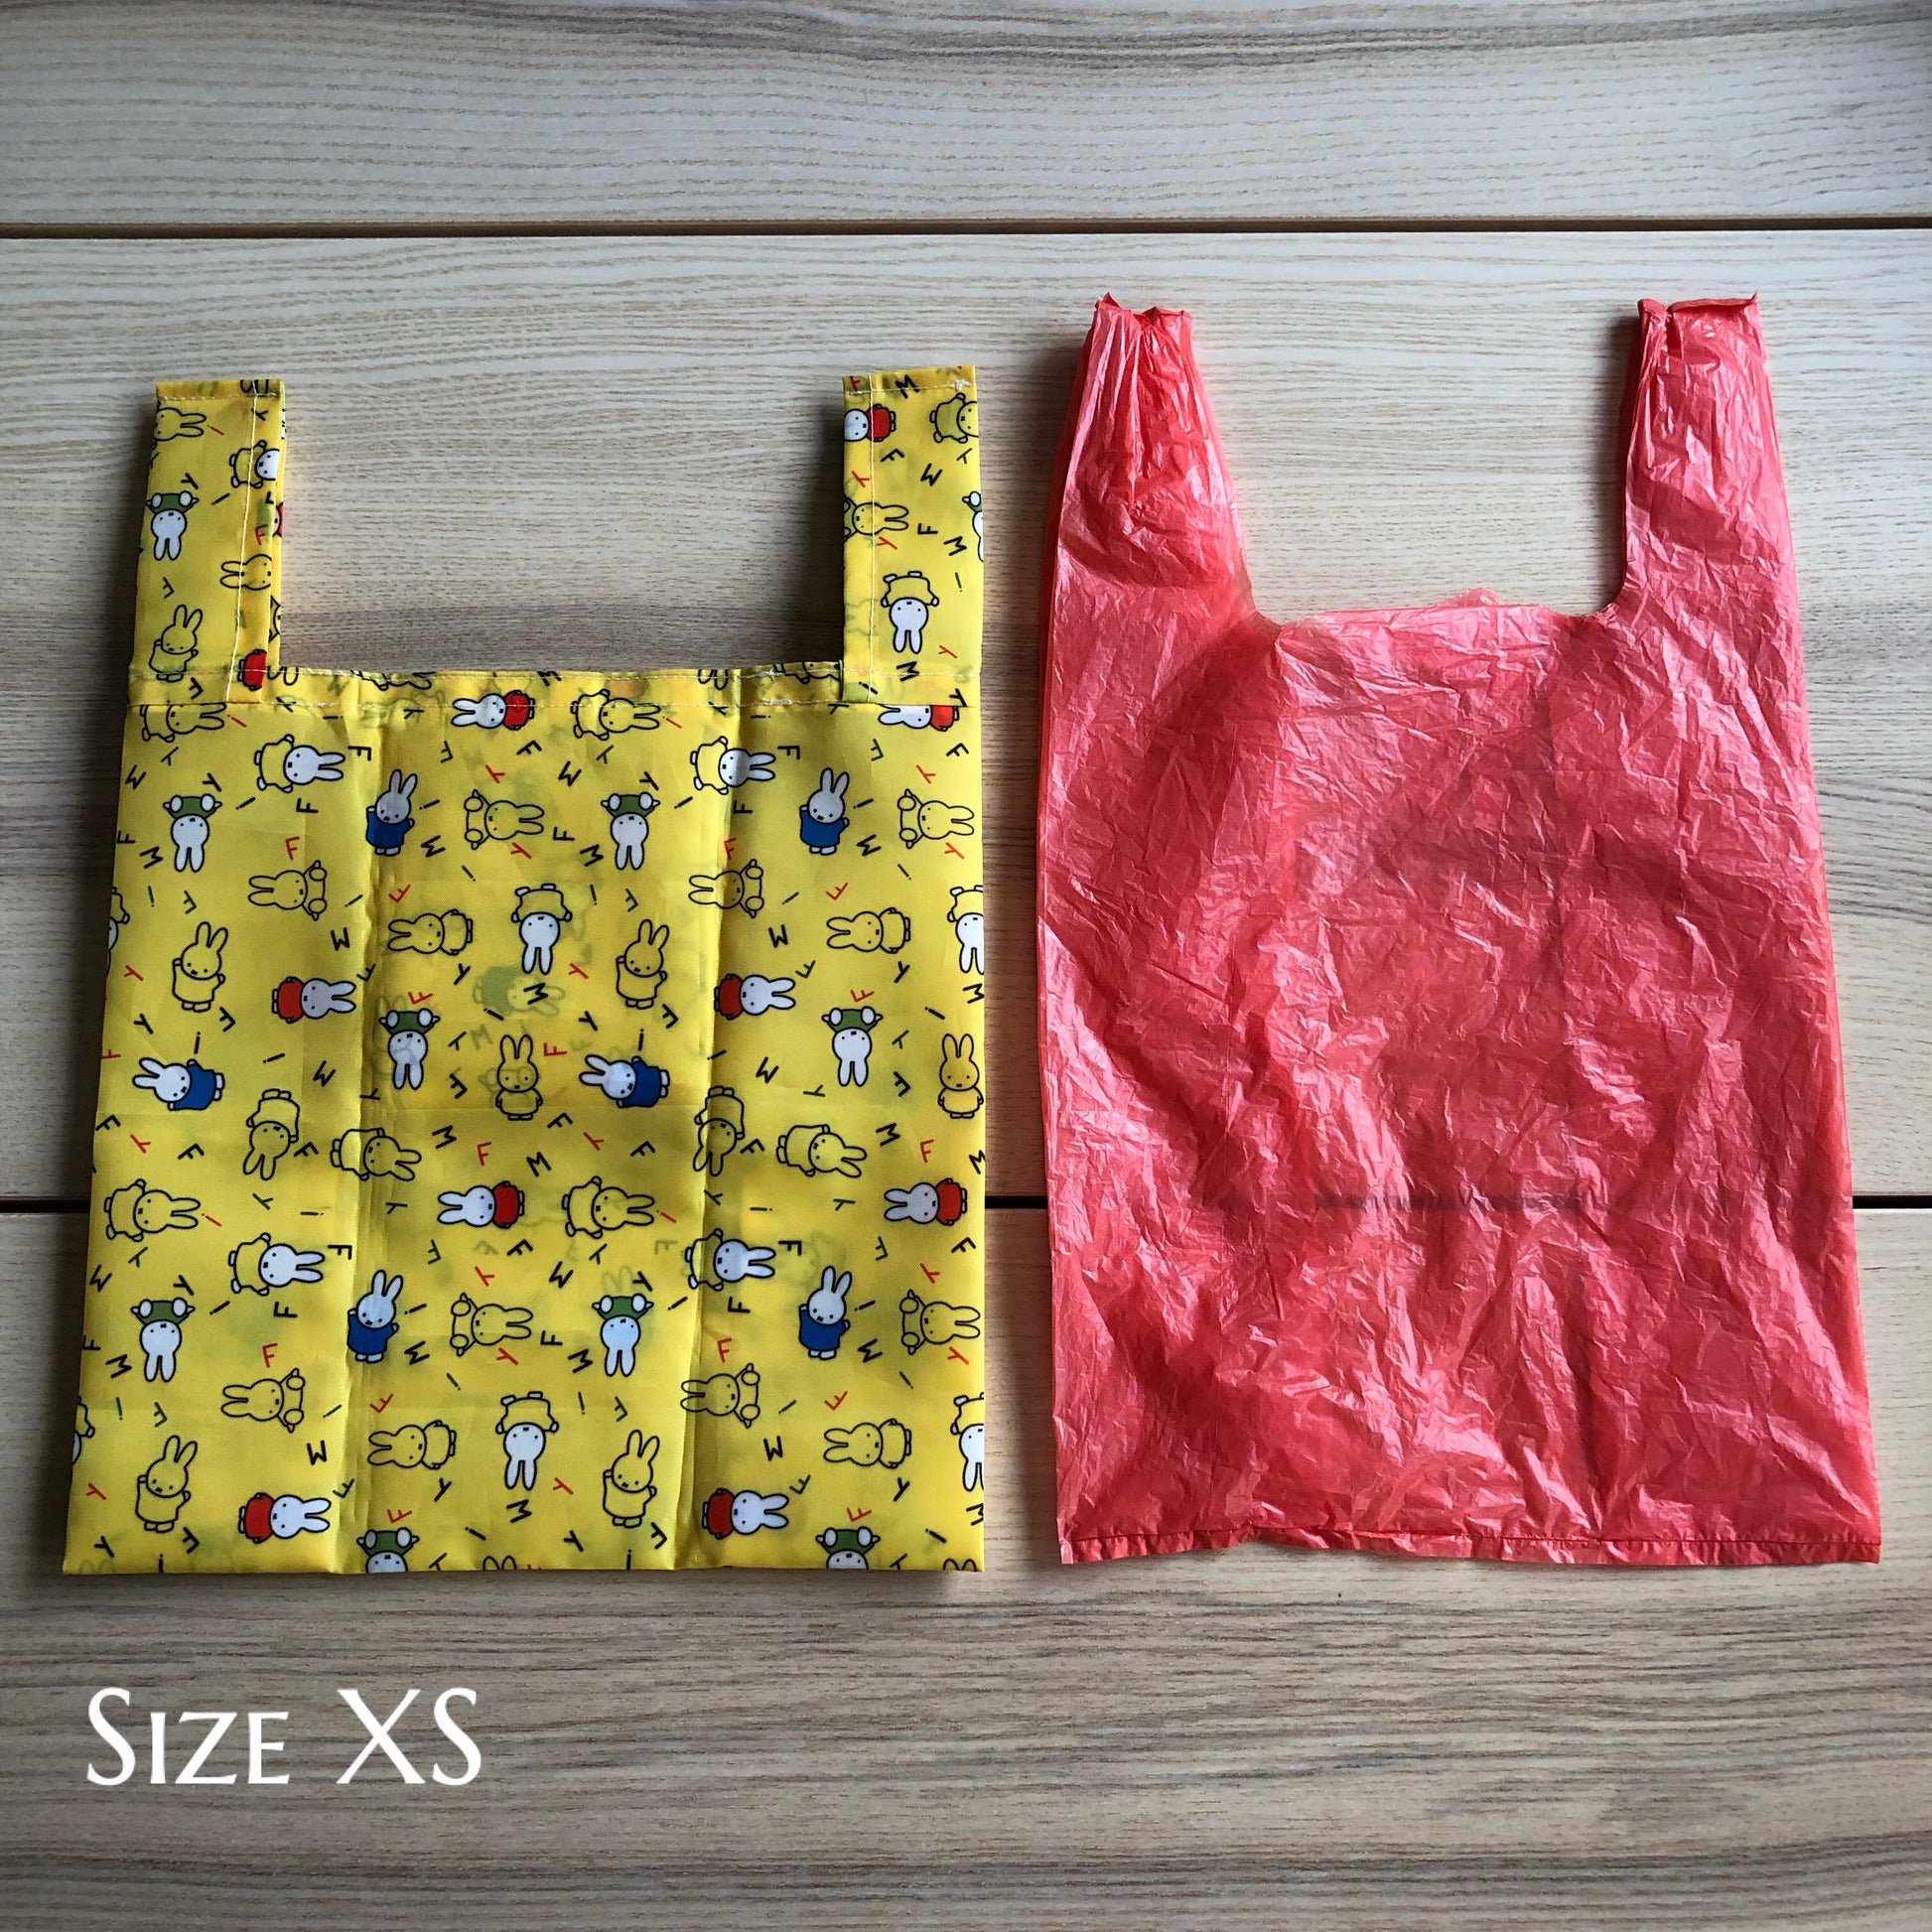  DIY Tote Bag Sewing Kit Form Stitch Kits for Handmade Luxury  Gift Bags/Bag makeover/Shopping Bag : Arts, Crafts & Sewing